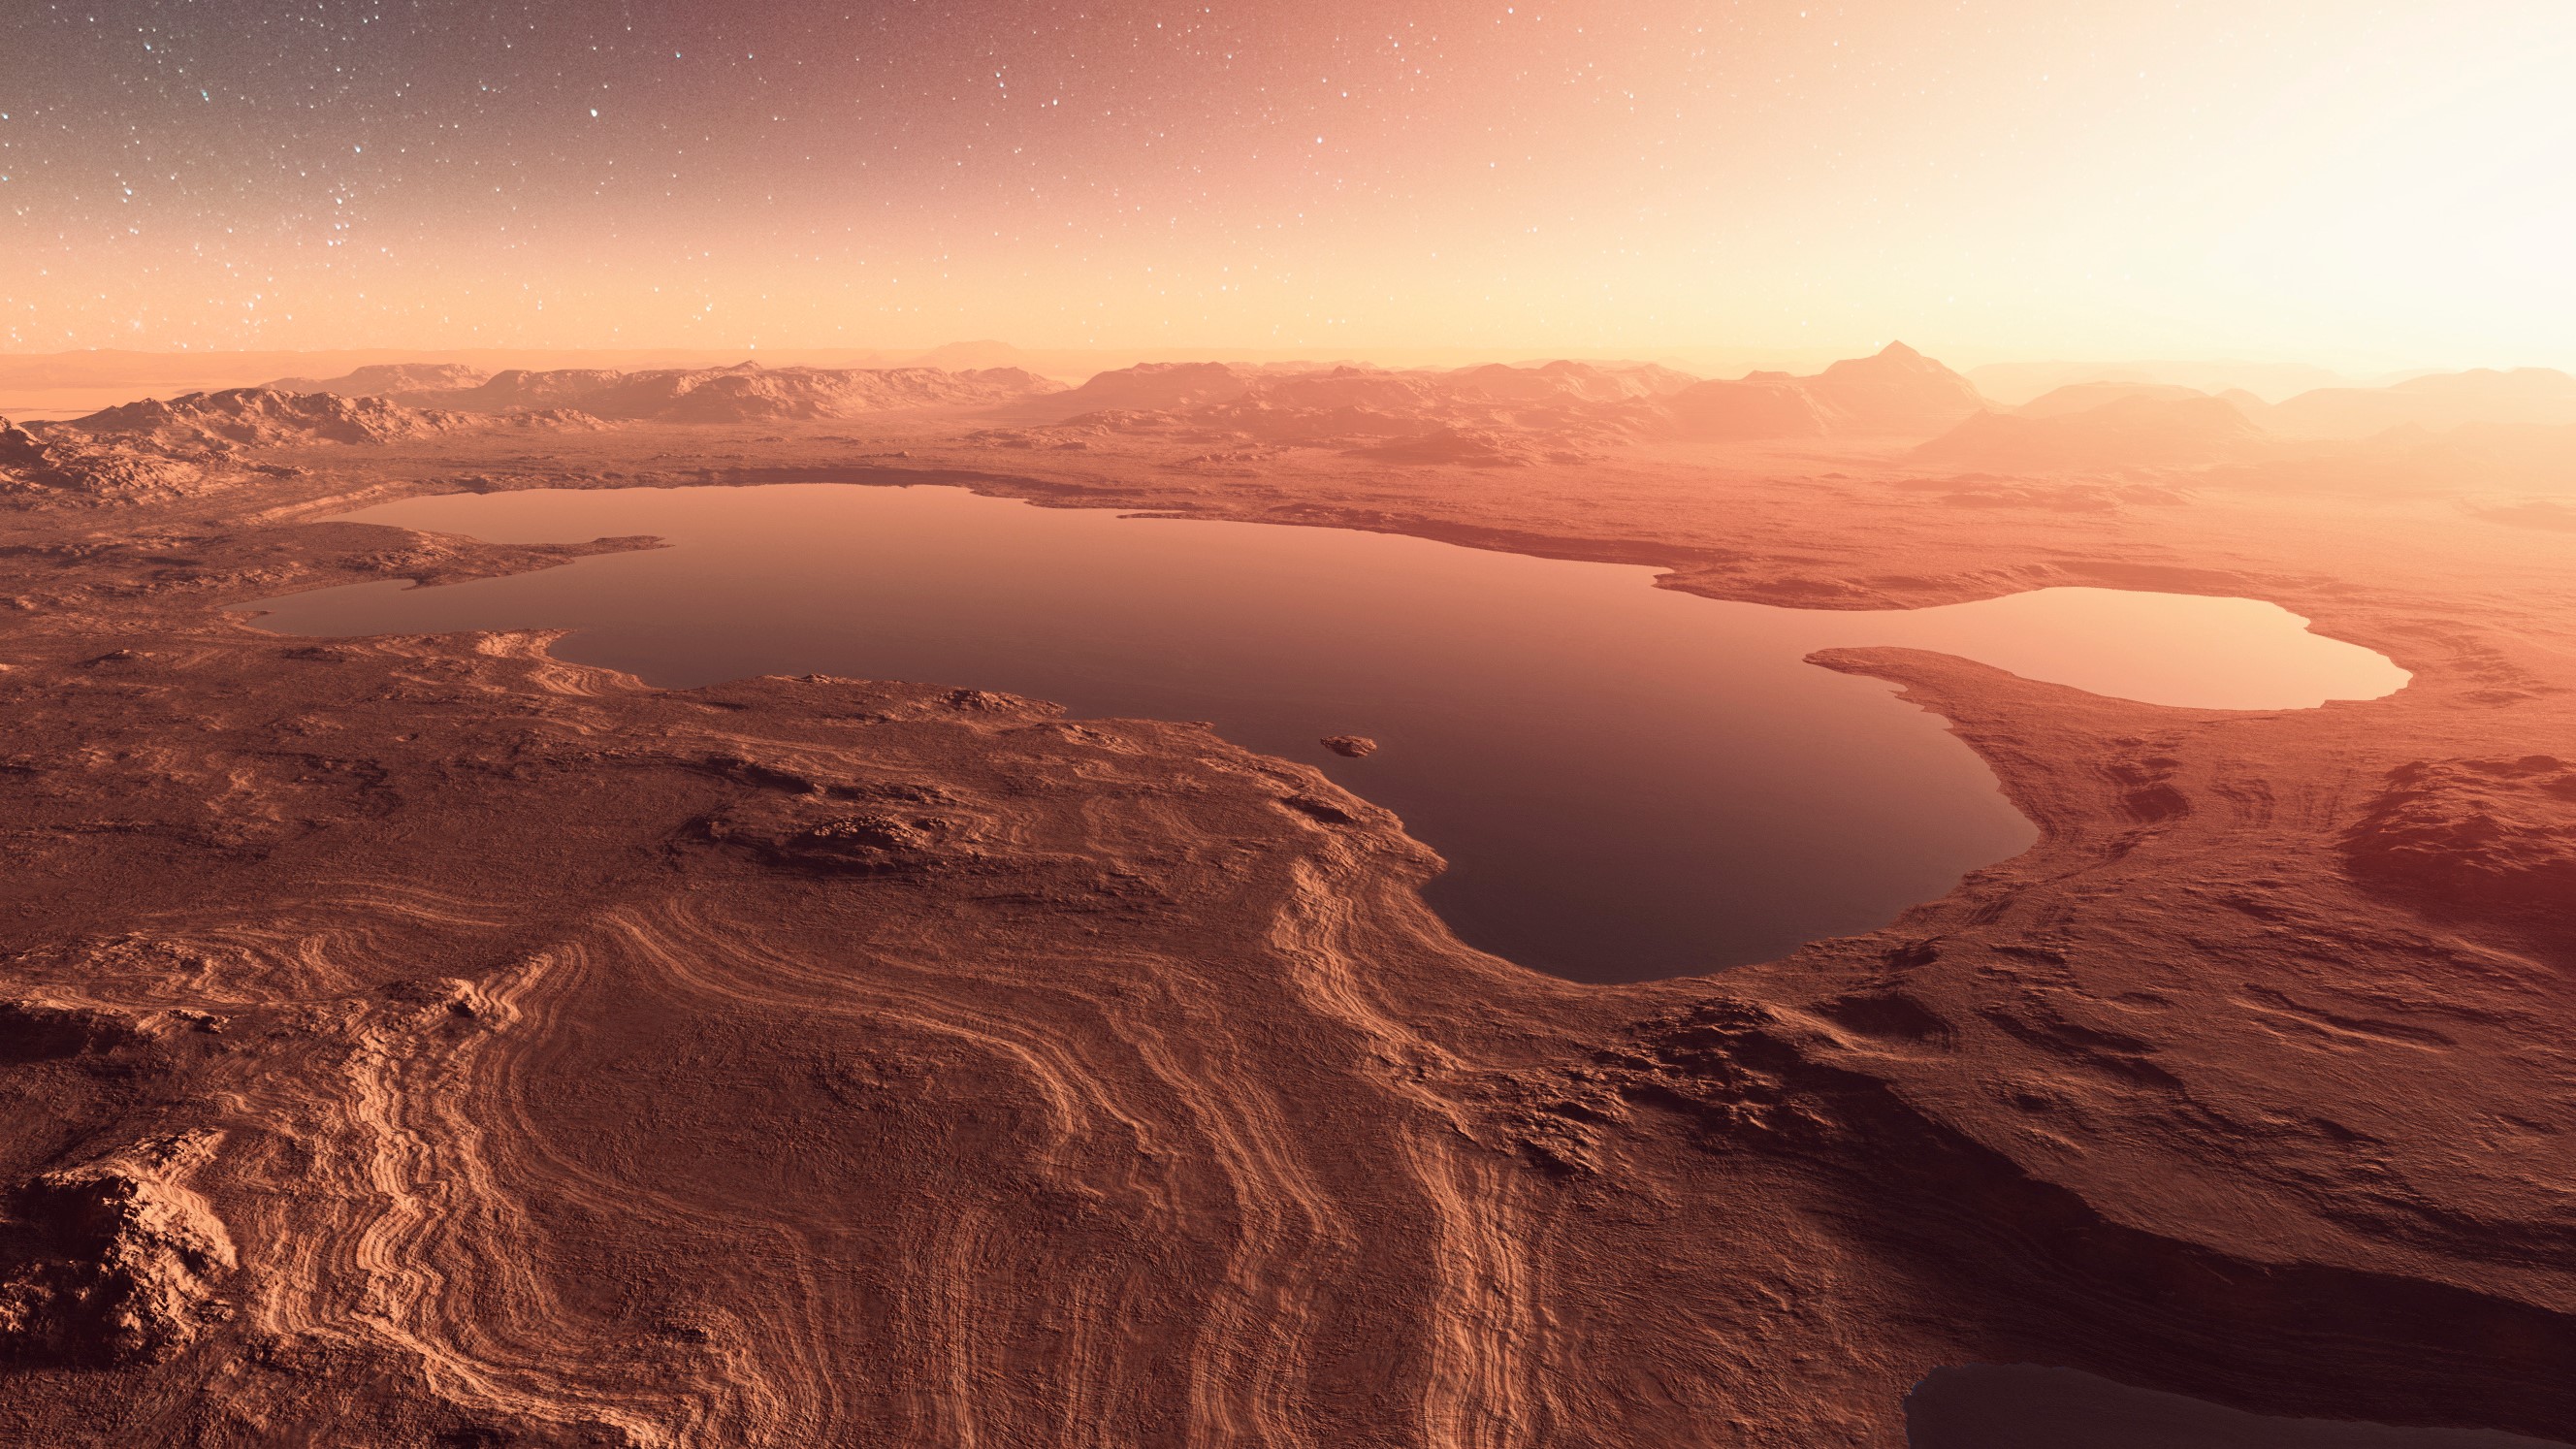 Water ice exists all over the solar system. This artist’s illustration shows what Mars would look like with lakes of water.